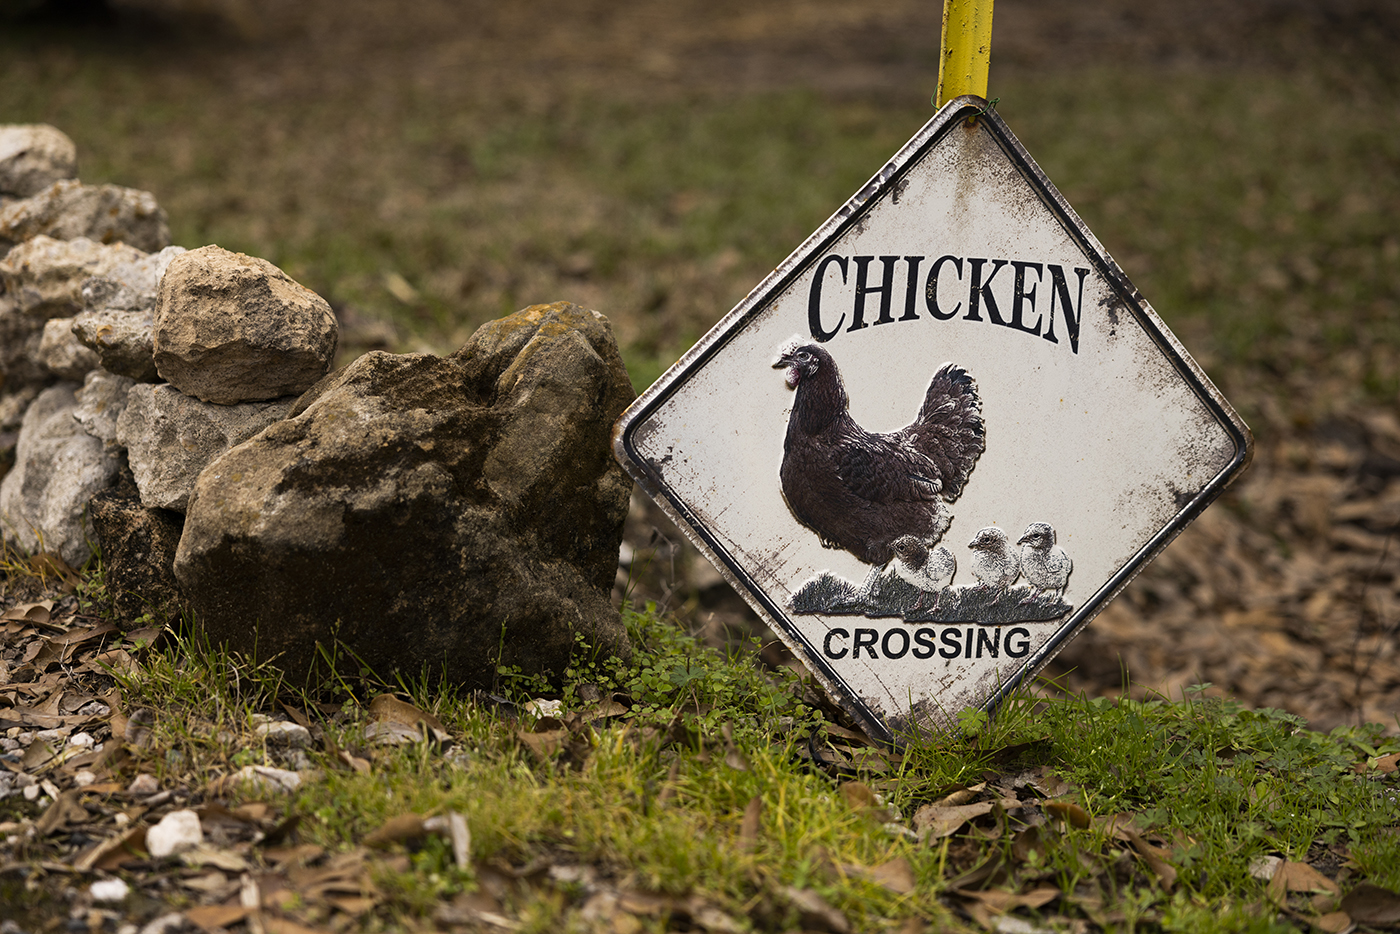 A chicken crossing sign warns visitors entering the Clements Family Farm